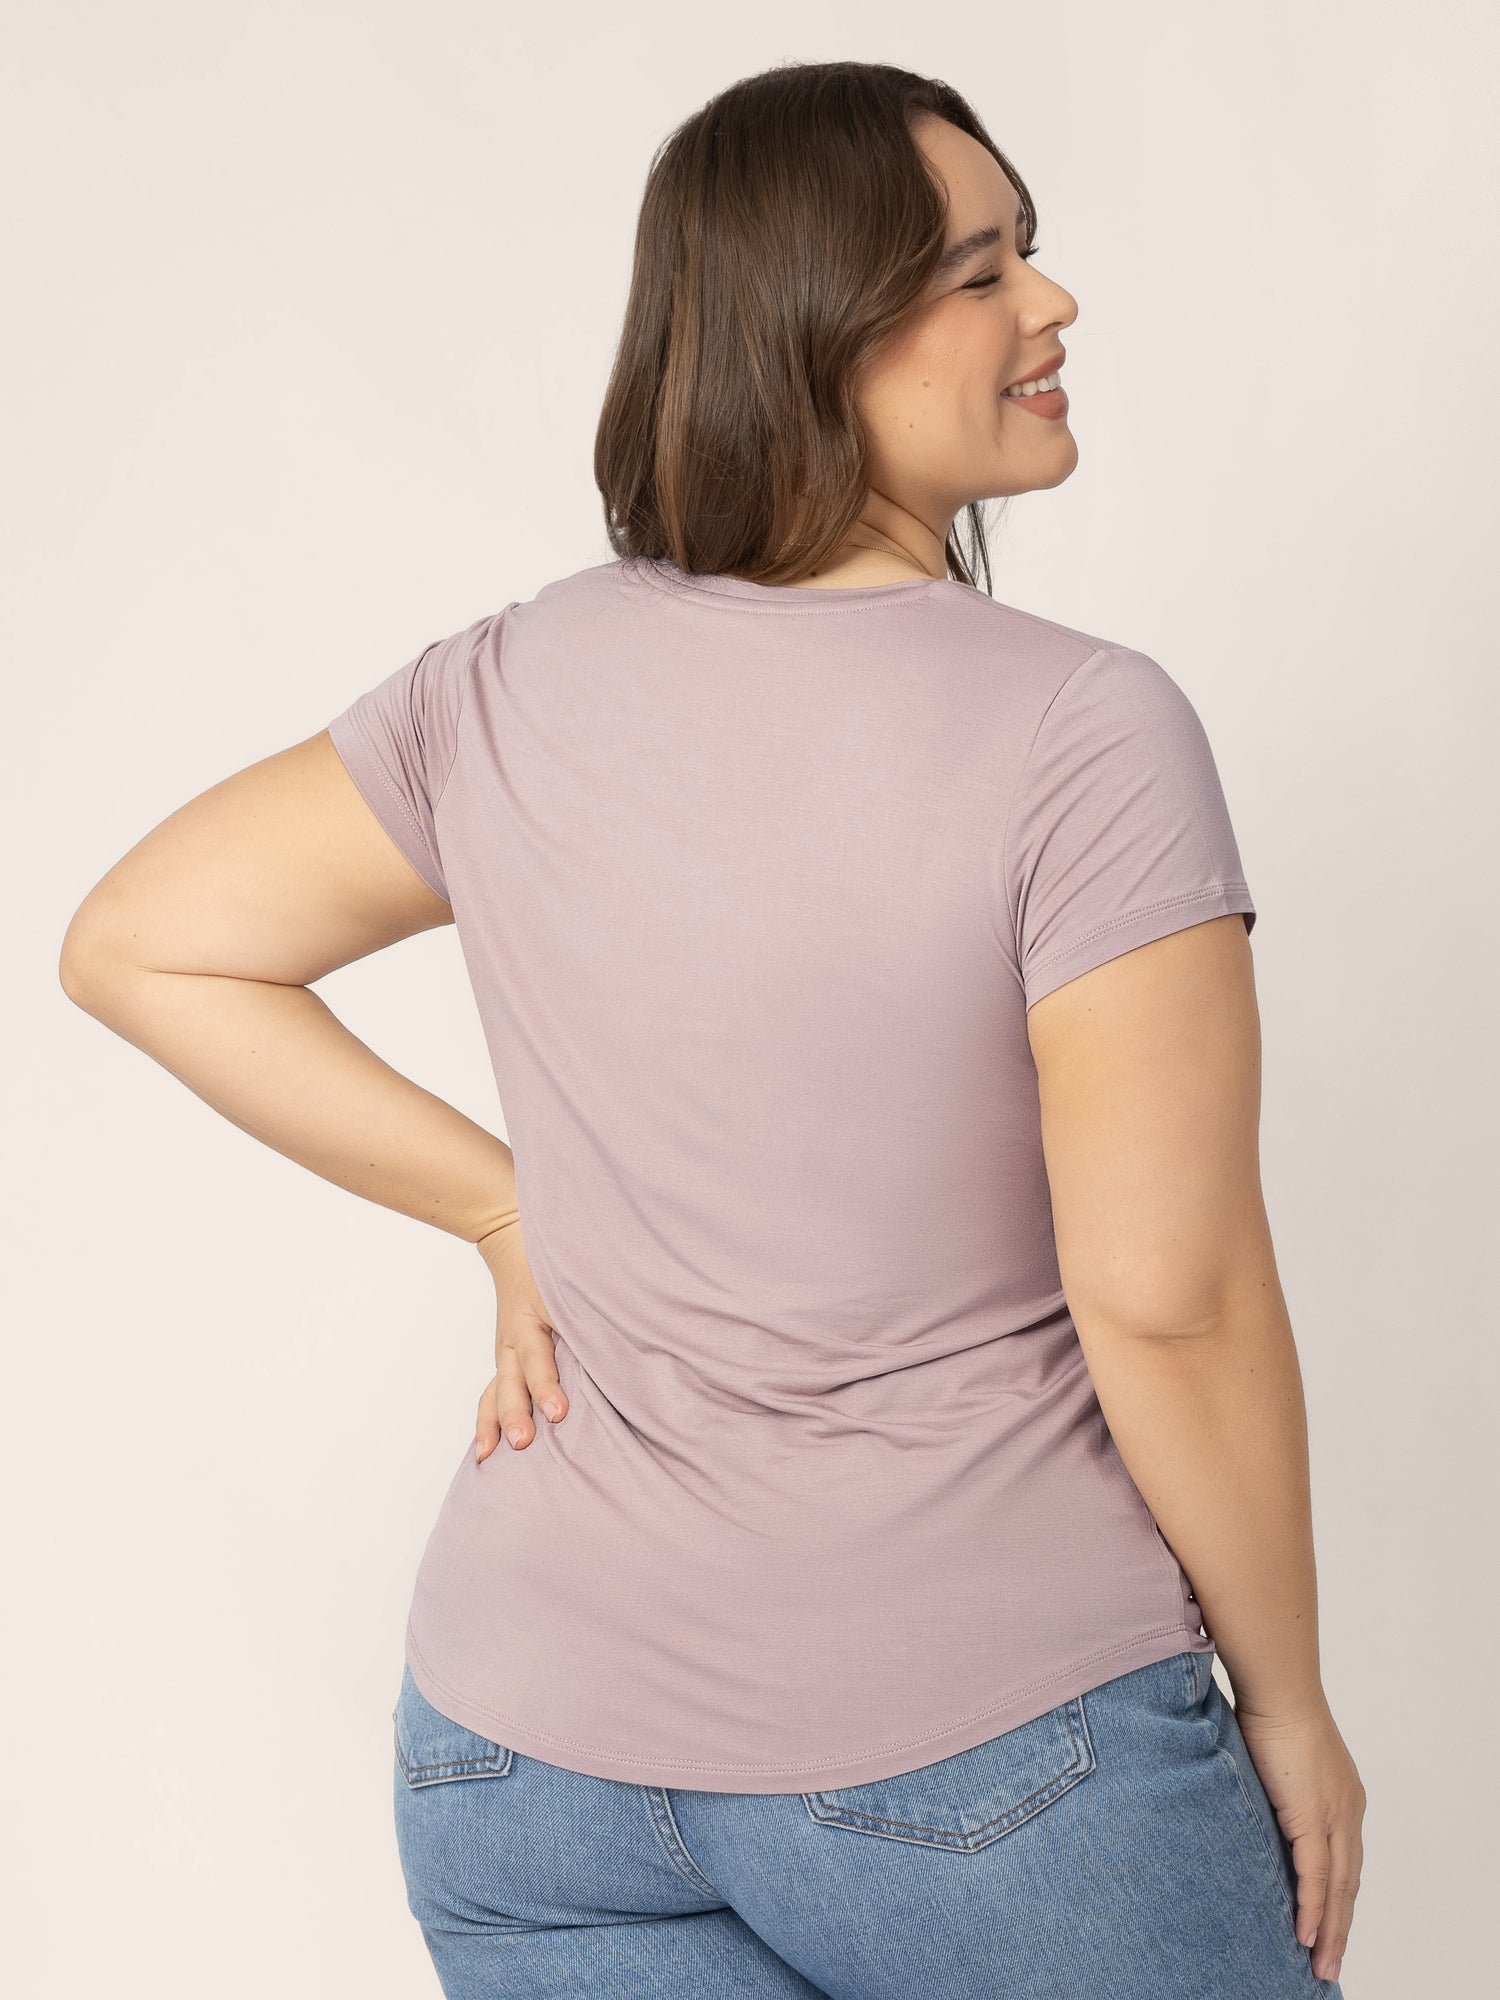 Back view of model wearing the Everyday Maternity & Nursing T-shirt in lilac stone